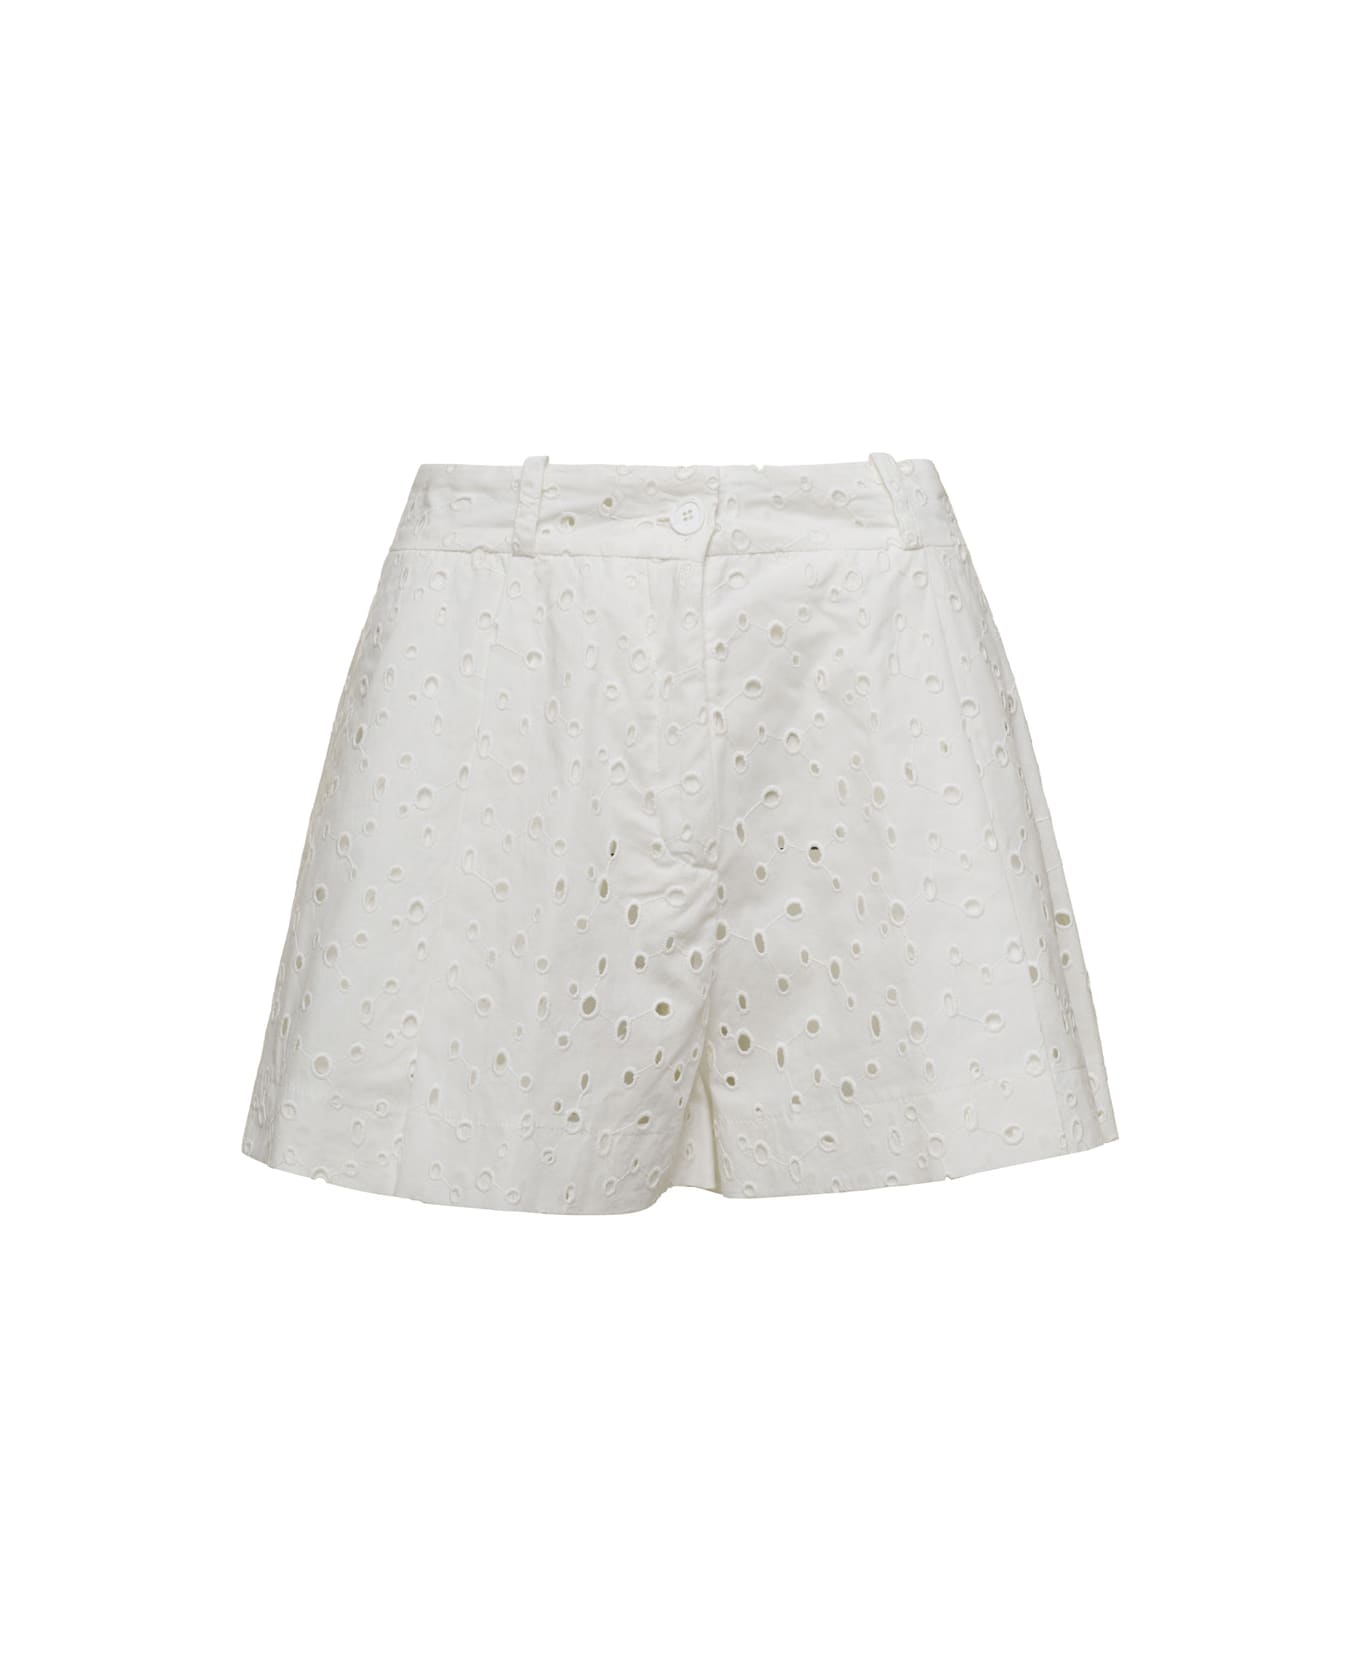 SEMICOUTURE White Broderie Anglaise Shorts In Cotton Blend Woman - White